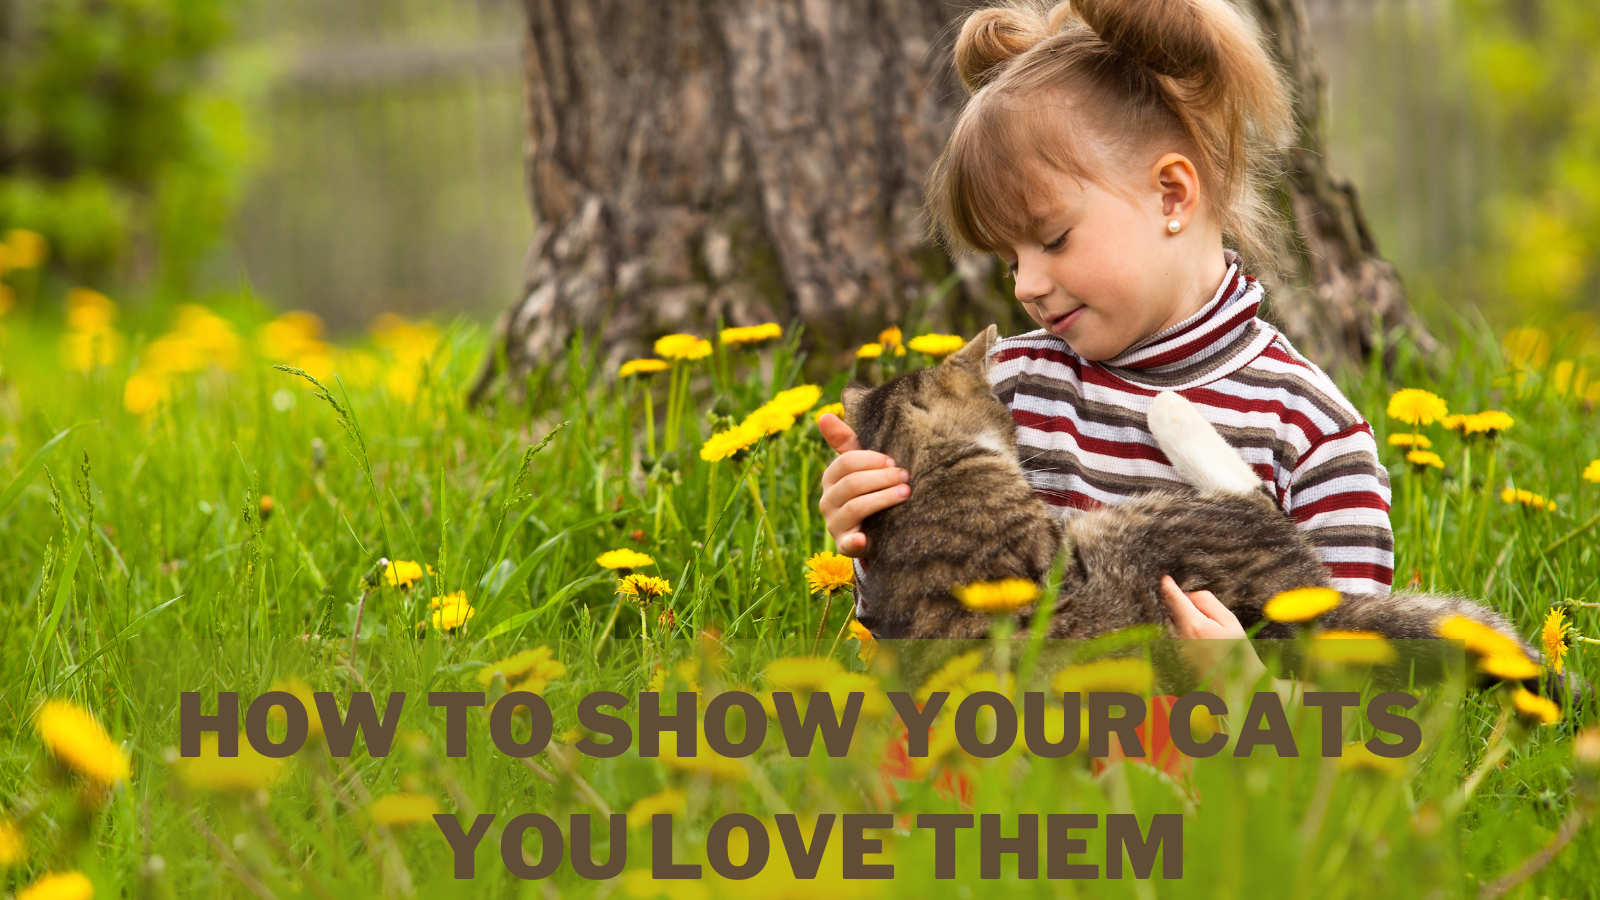 How To Show Your Cats You Love Them